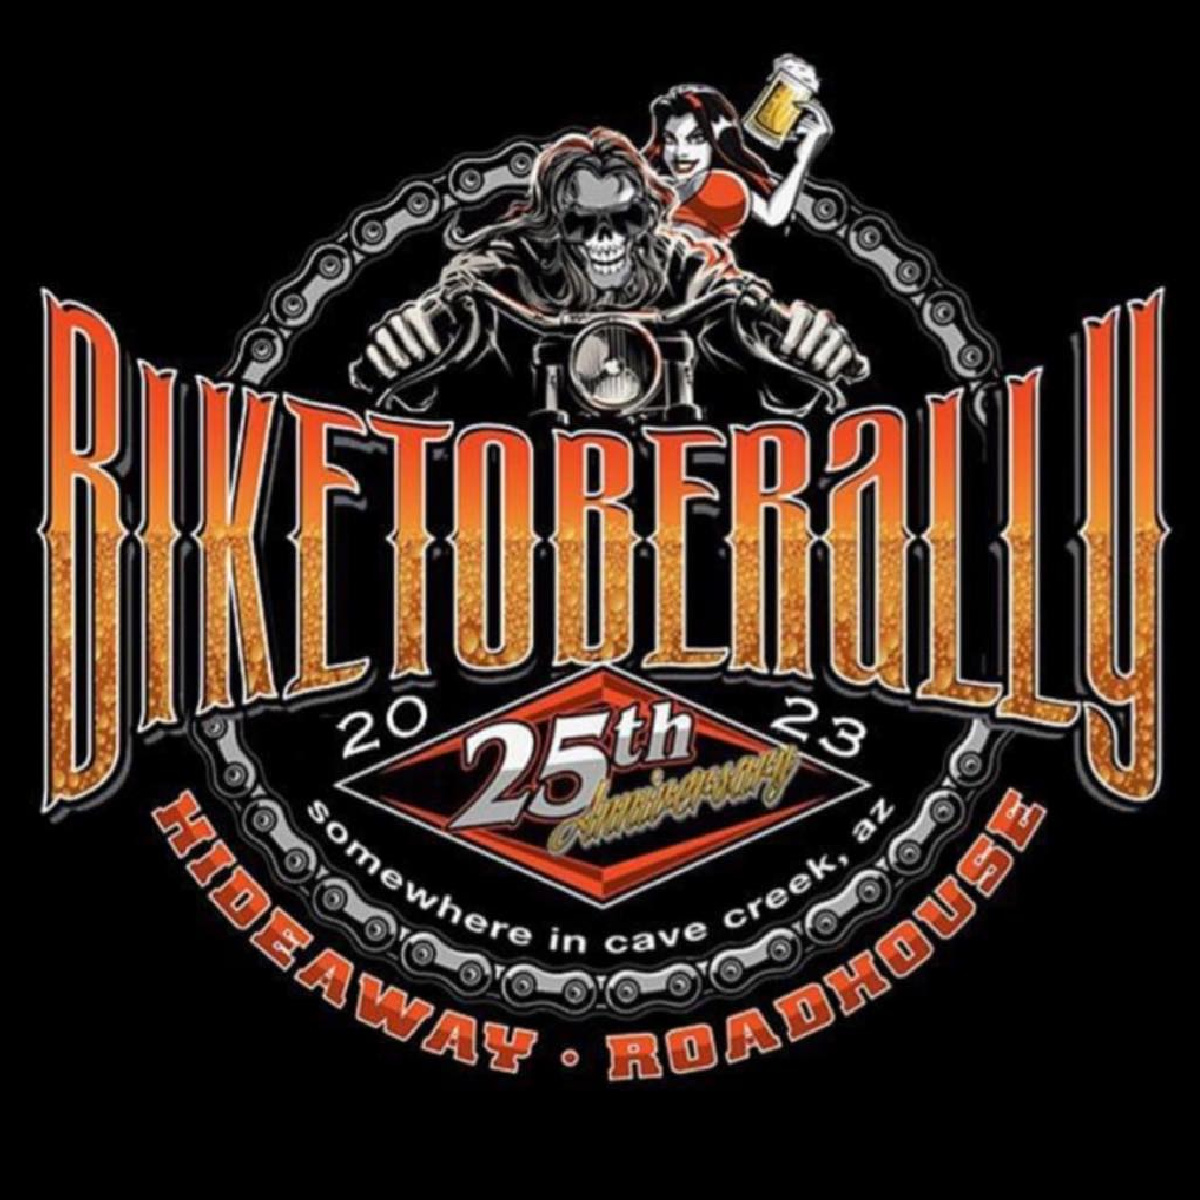 Come and check us out at the 25th anniversary Biketober Rally at Hideaway/ Roadhouse Cave Creek this weekend! We'll see you there!

#smtwheels #ridewiththebest #cavecreek #hideaway #roadhouse # biketoberrally